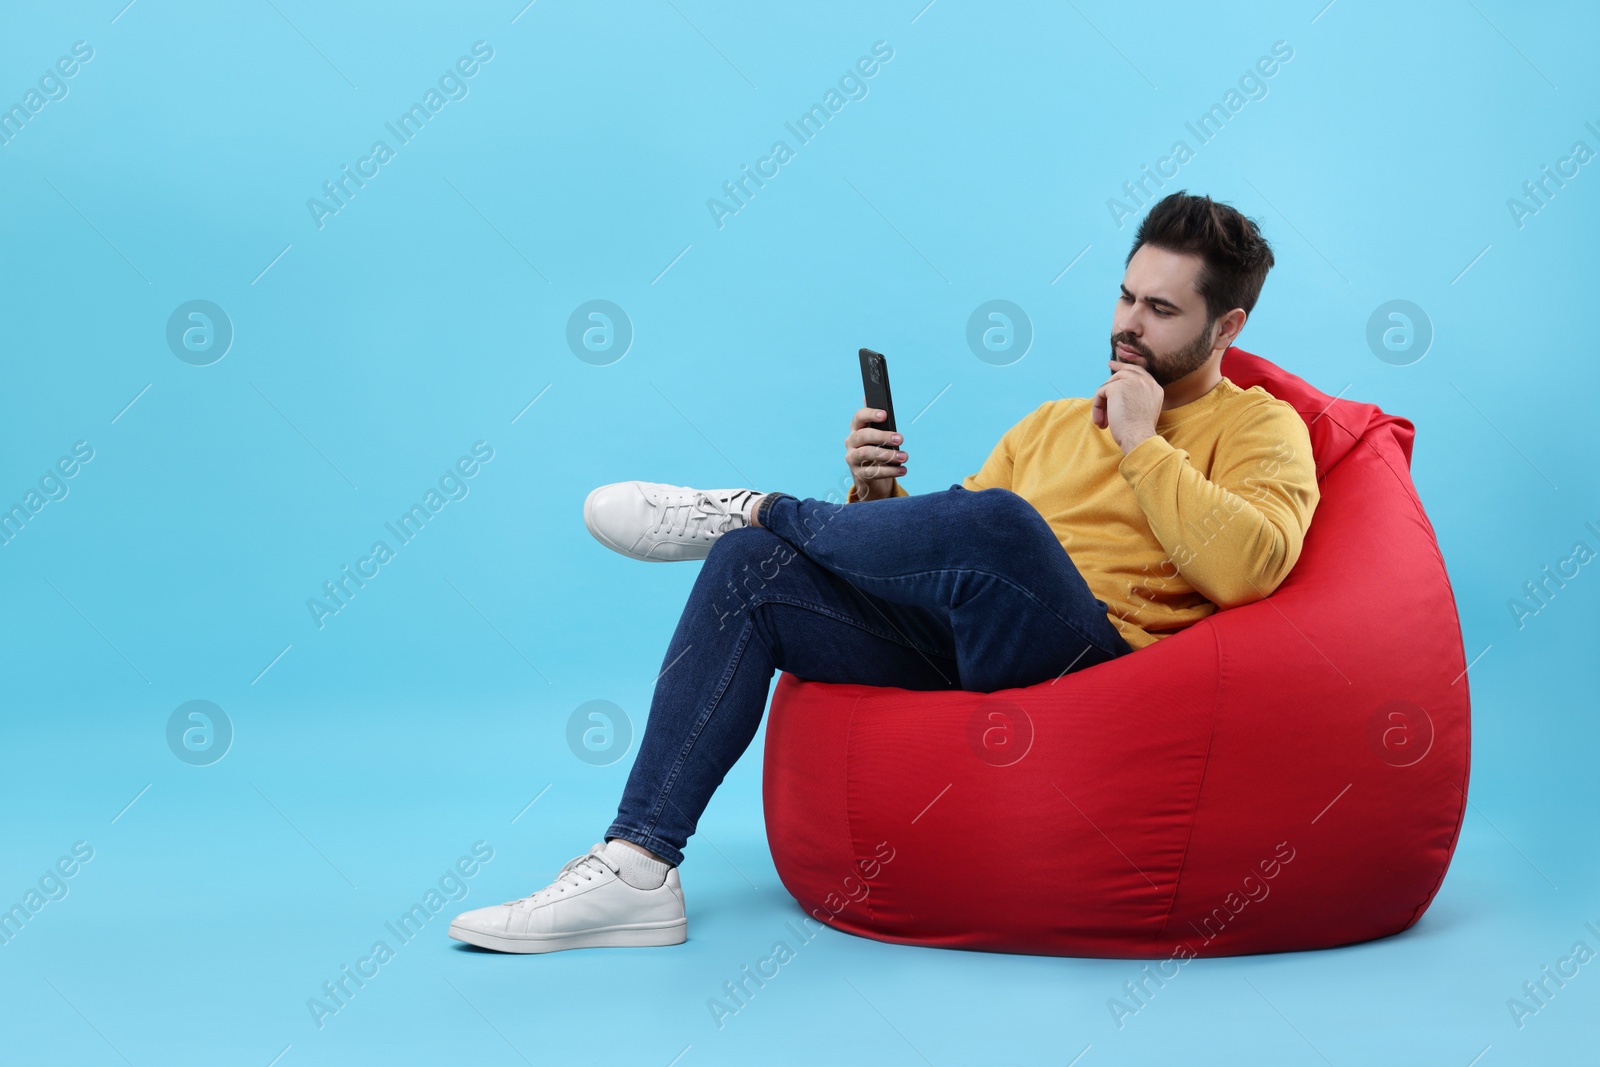 Photo of Handsome young man using smartphone on bean bag chair against light blue background. Space for text